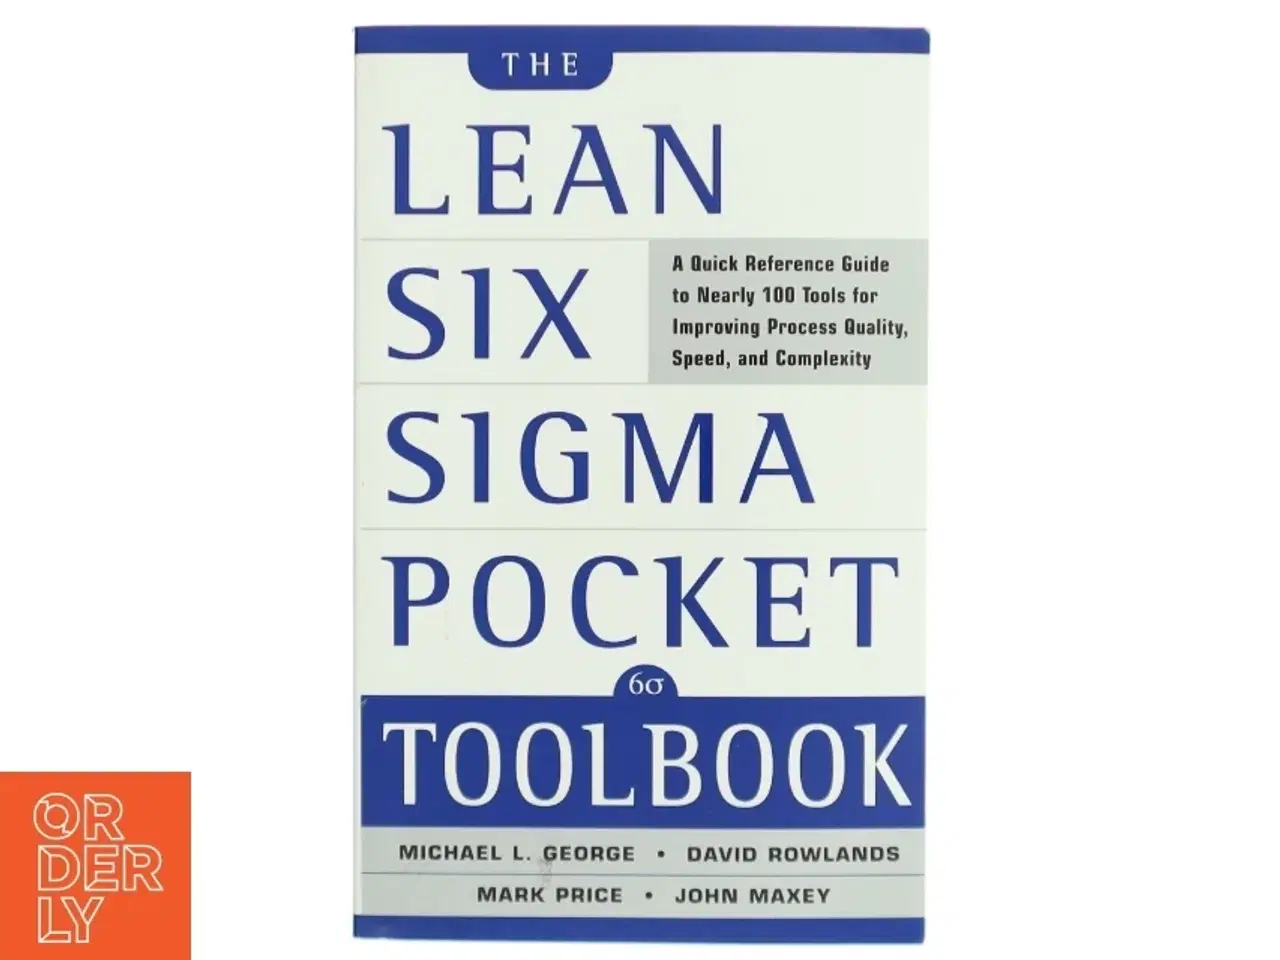 Billede 1 - The lean Six Sigma pocket toolbook : a quick reference guide to nearly 100 tools for improving process quality, speed, and complexity (Bog)